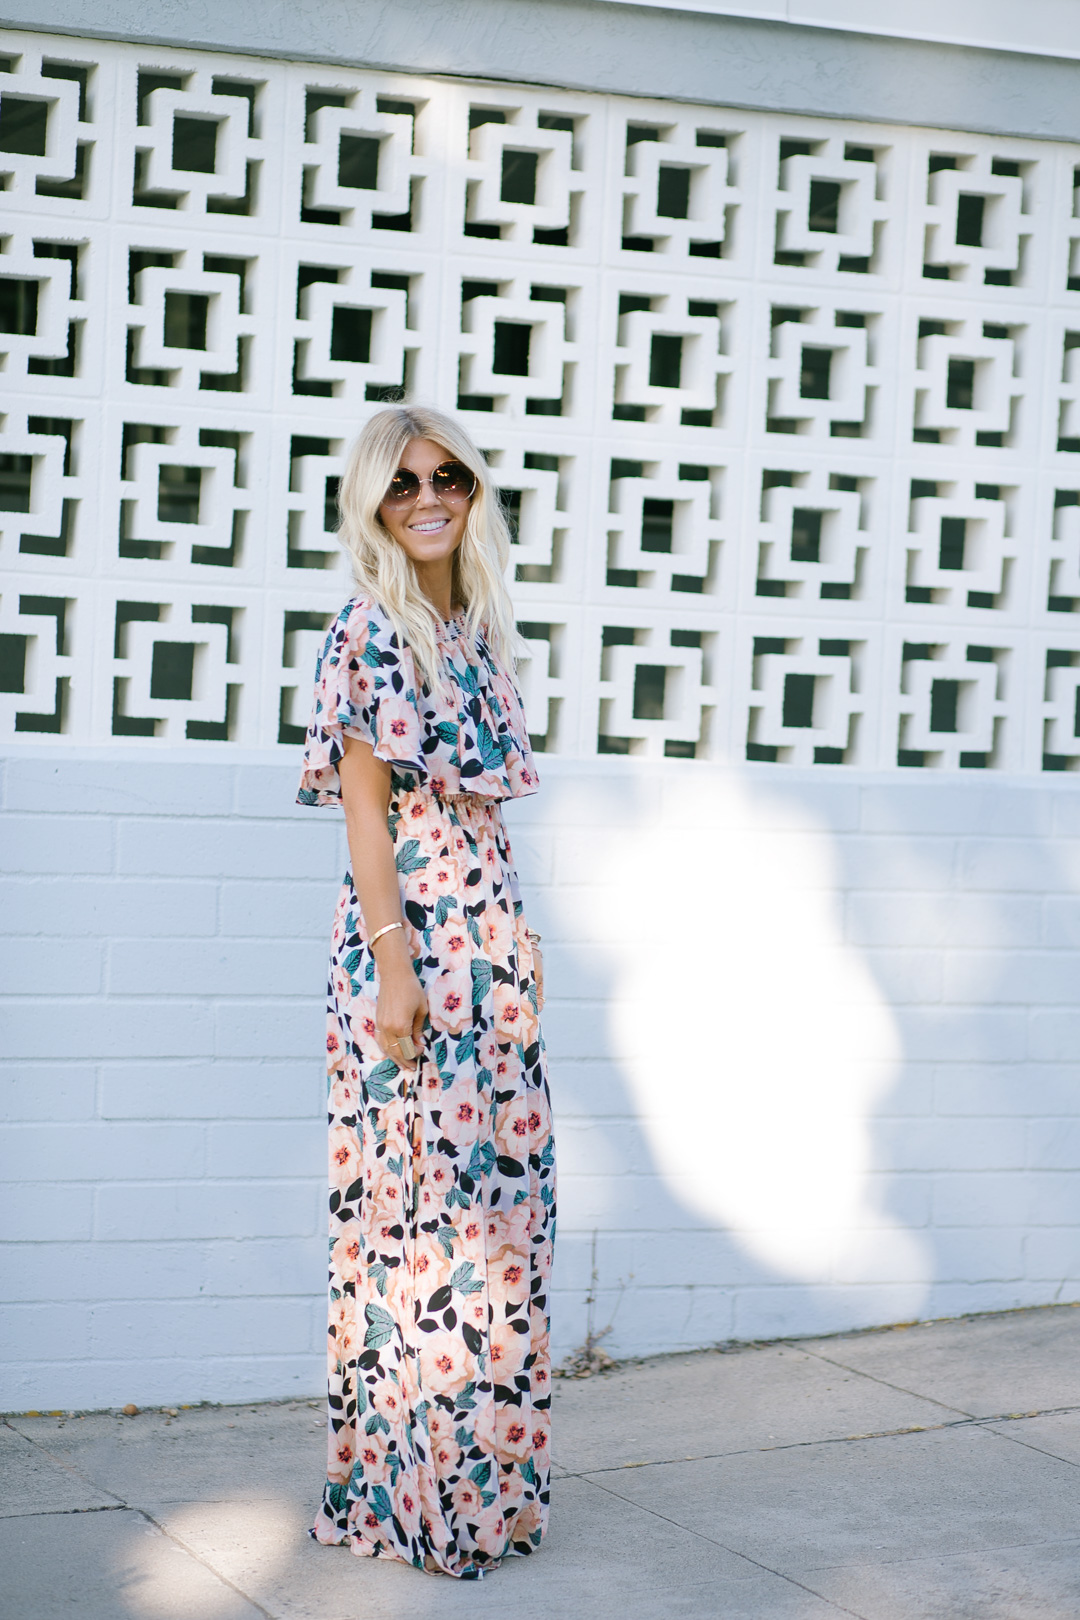 Lisa Allen of Lunchpails and Lipstick wearing a floral maxi dress by Show me your mumu and prada platforms in Encinitas, CA 